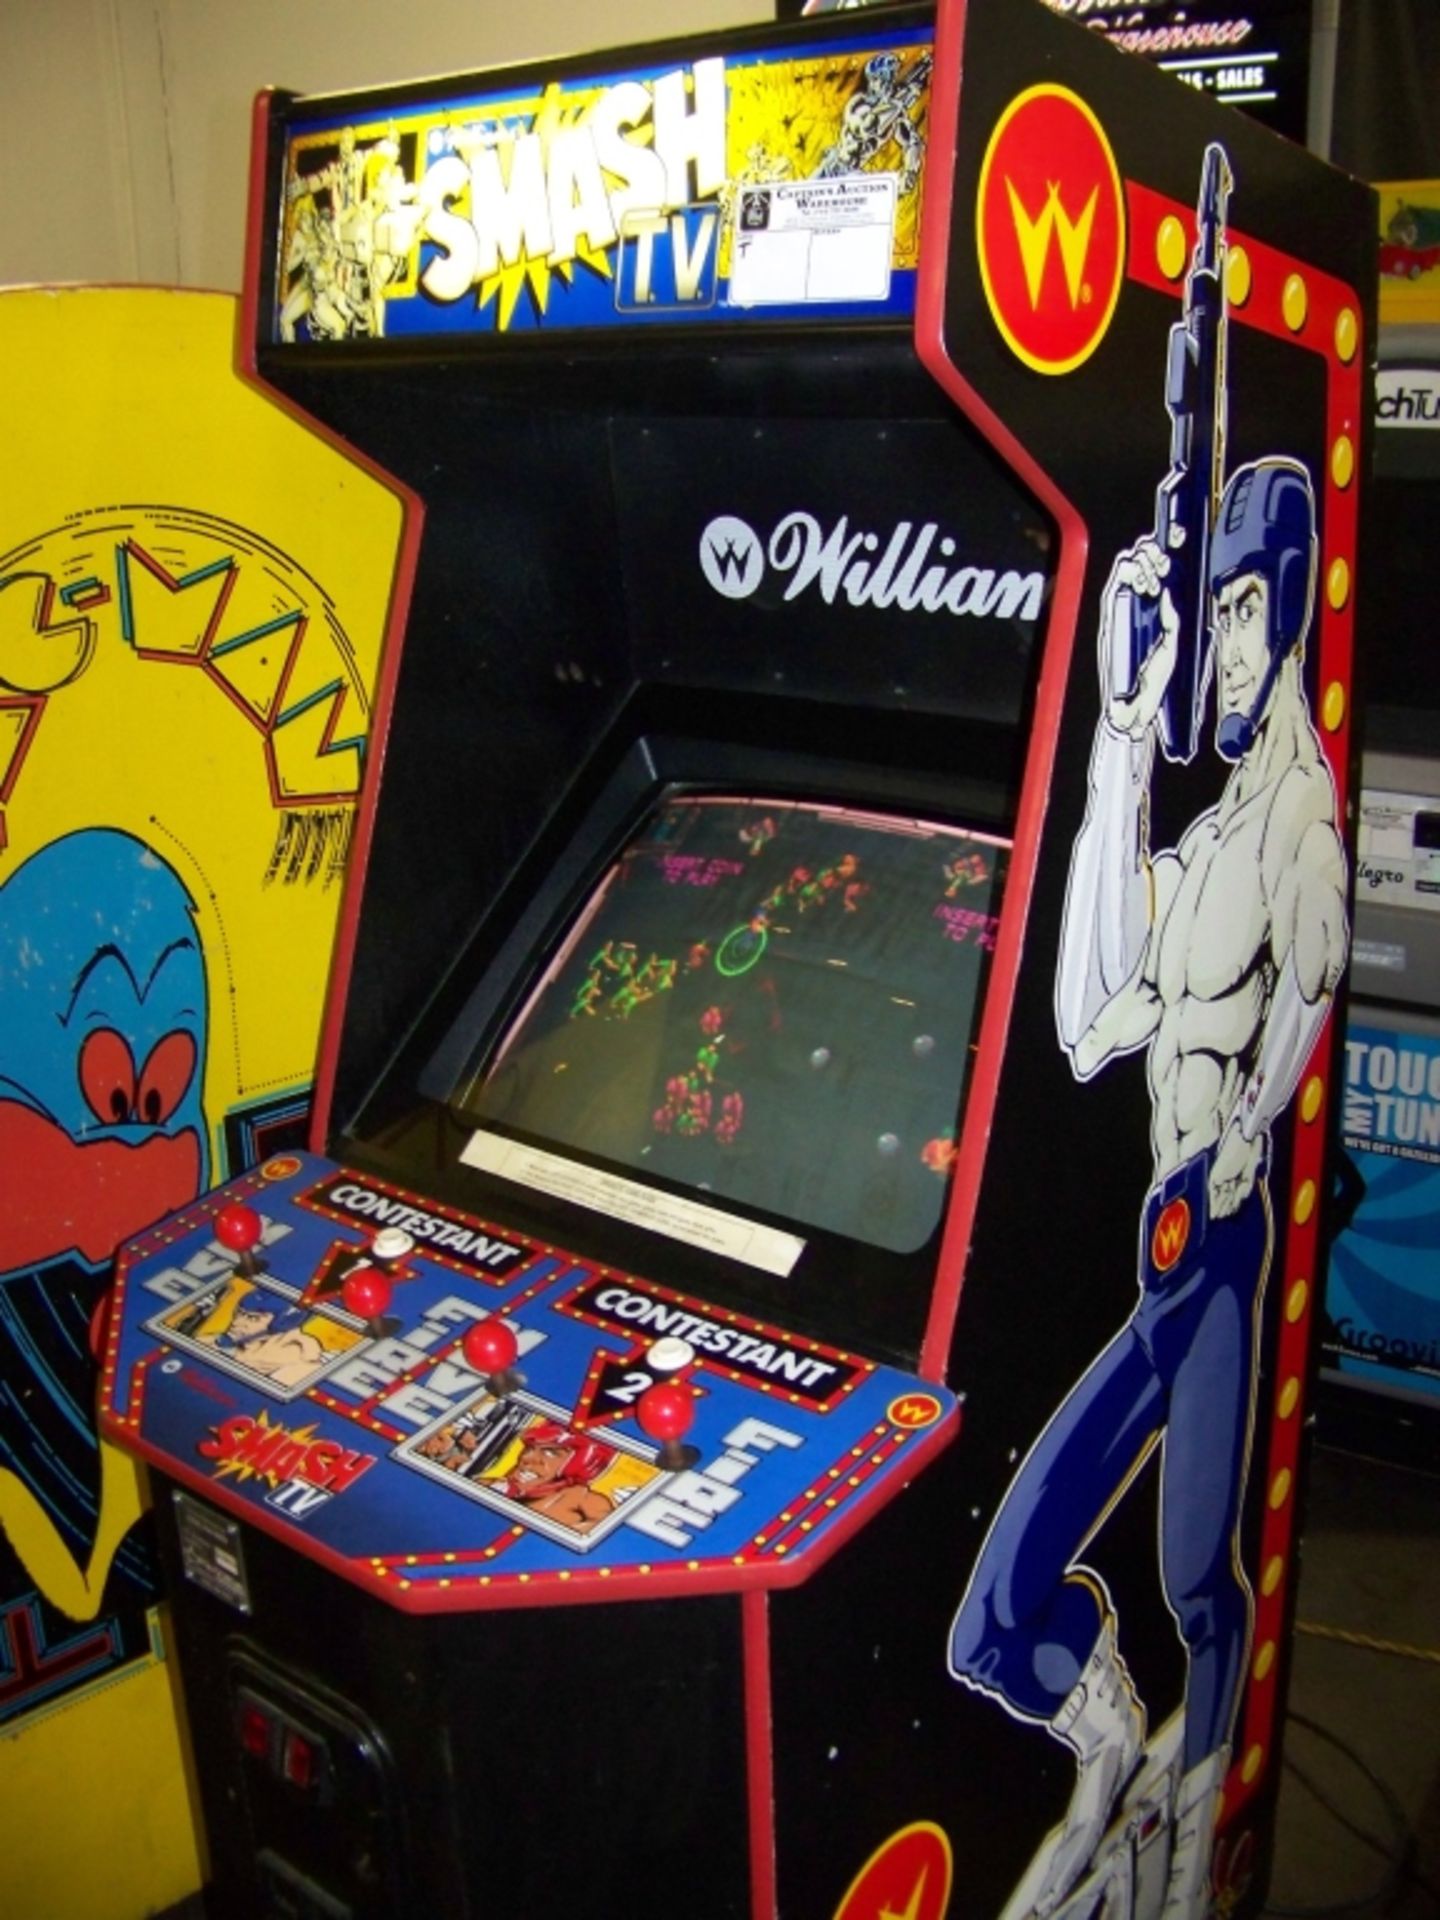 SMASH TV CLASSIC ARCADE GAME WILLIAMS Item is in used condition. Evidence of wear and commercial - Image 8 of 9